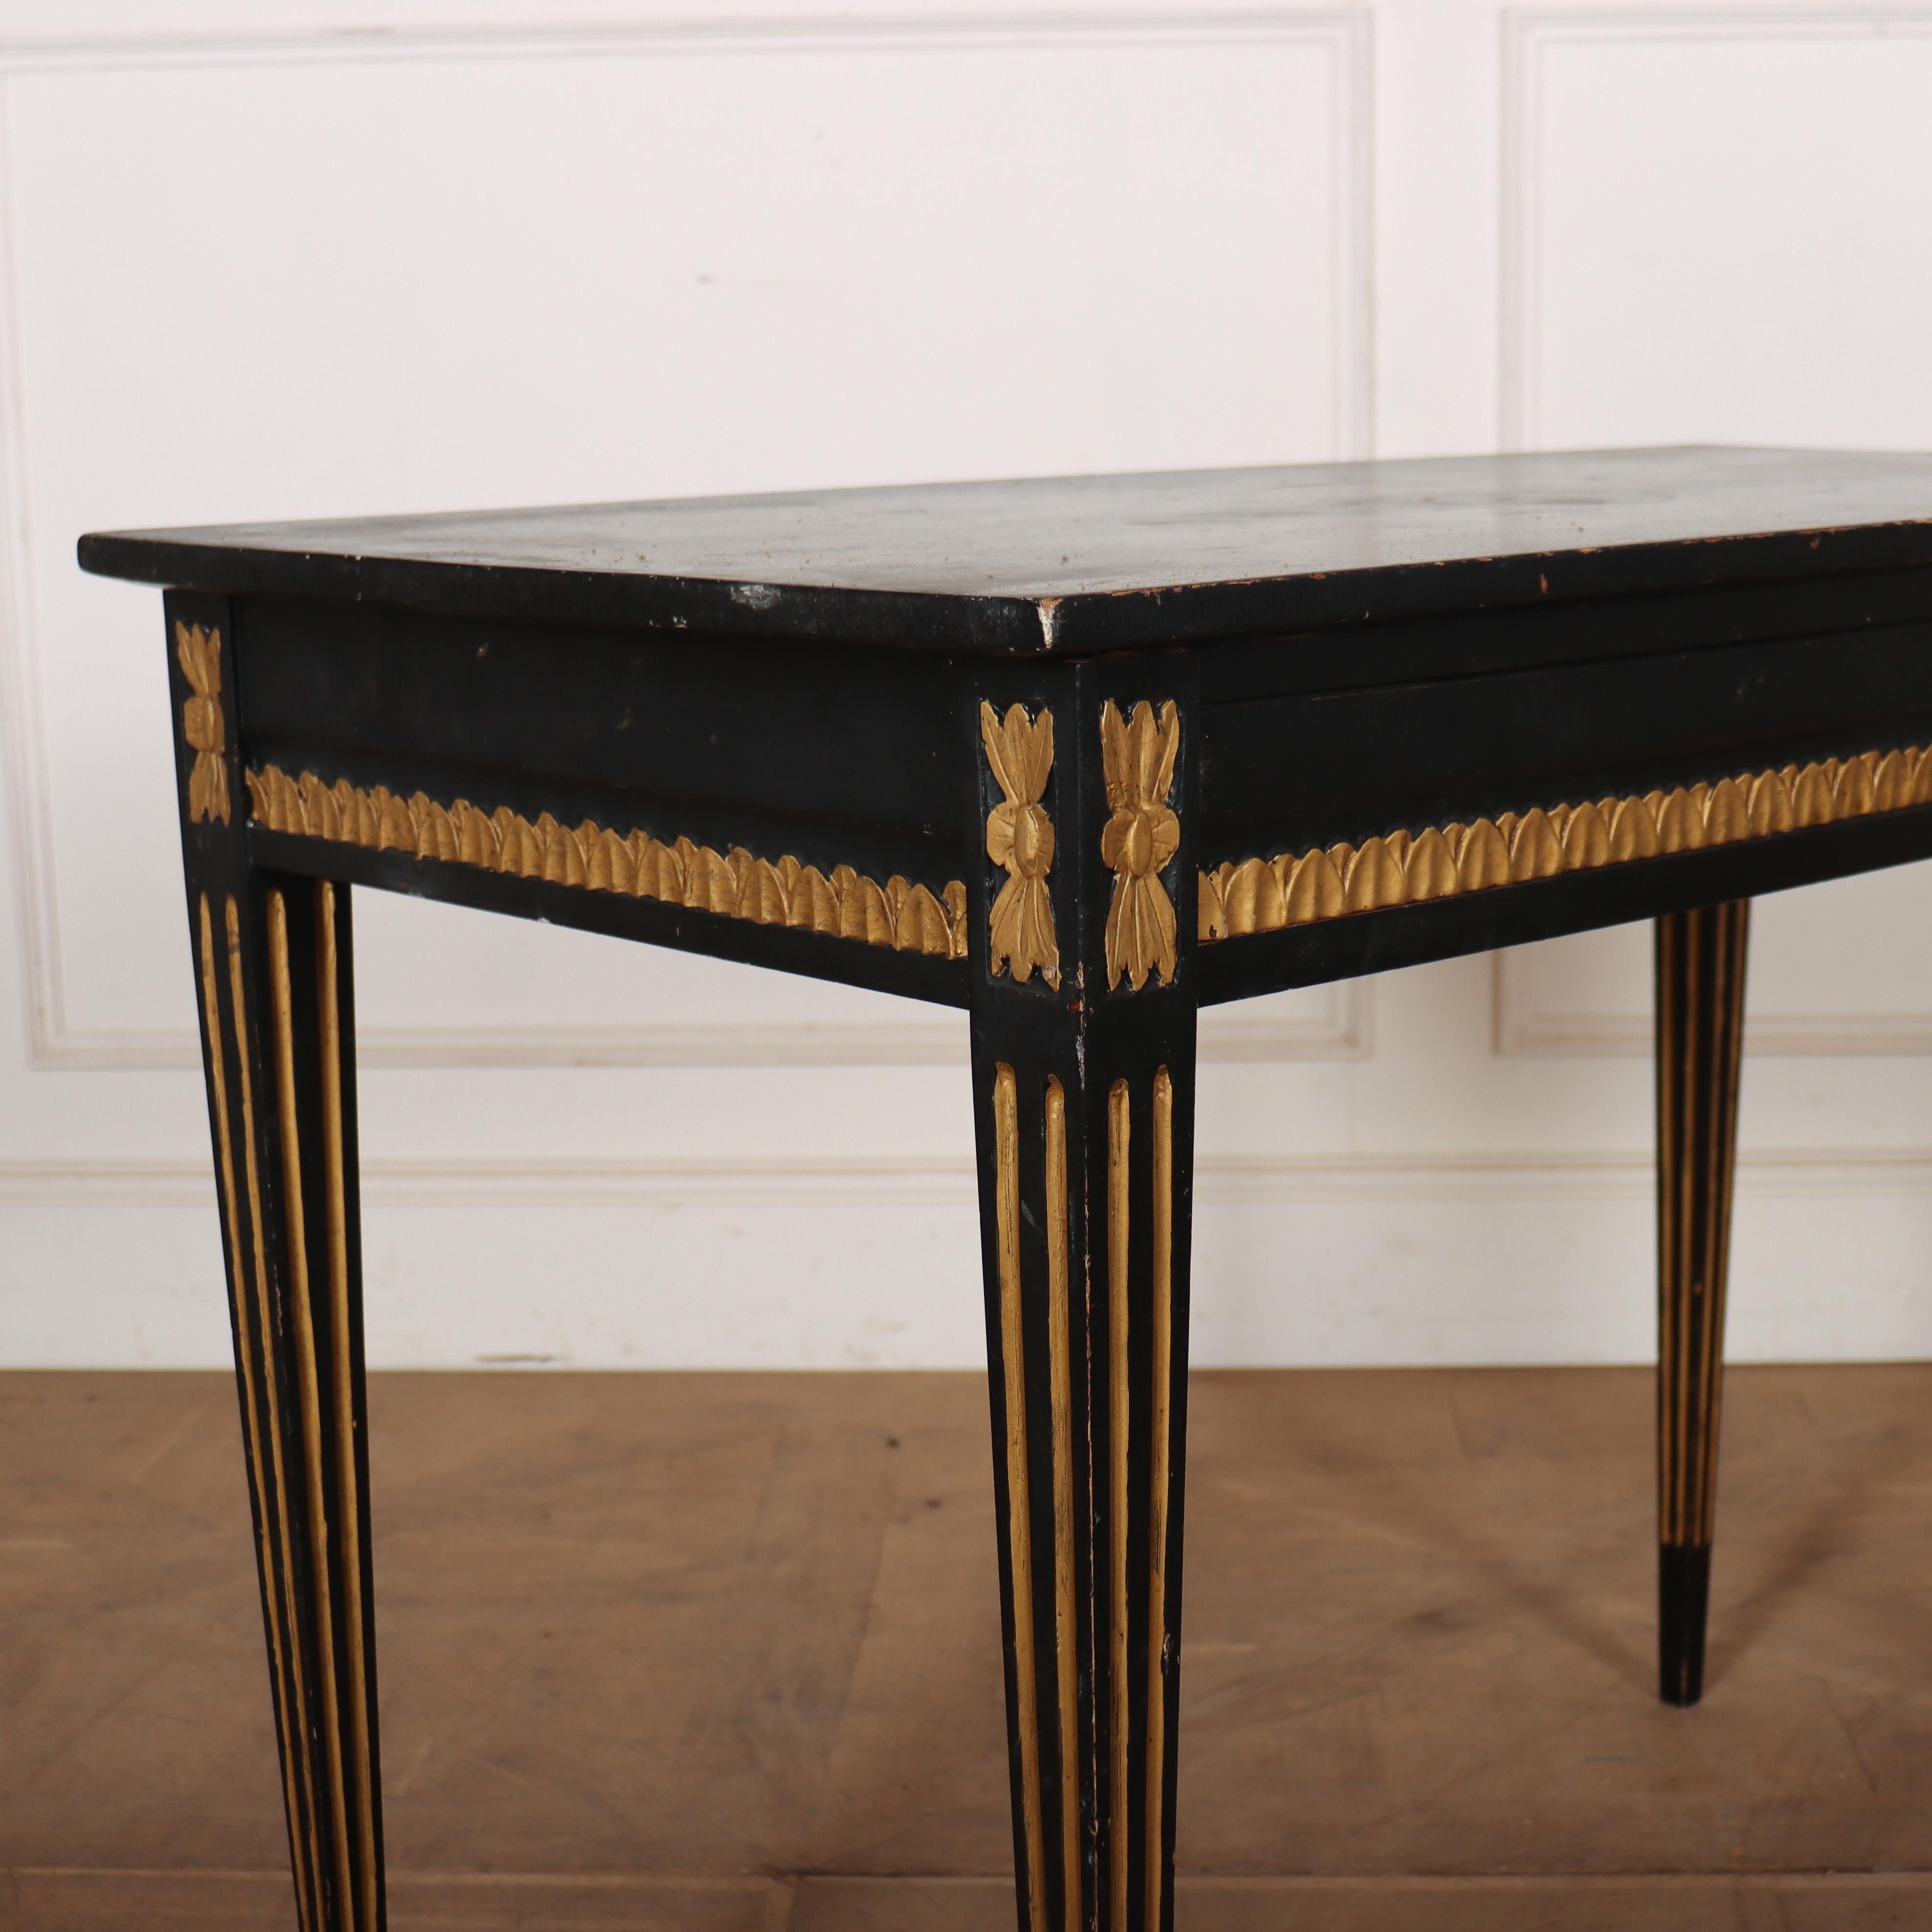 Early 19th C Swedish painted one drawer writing table. 1820.

Clearance is 24.5